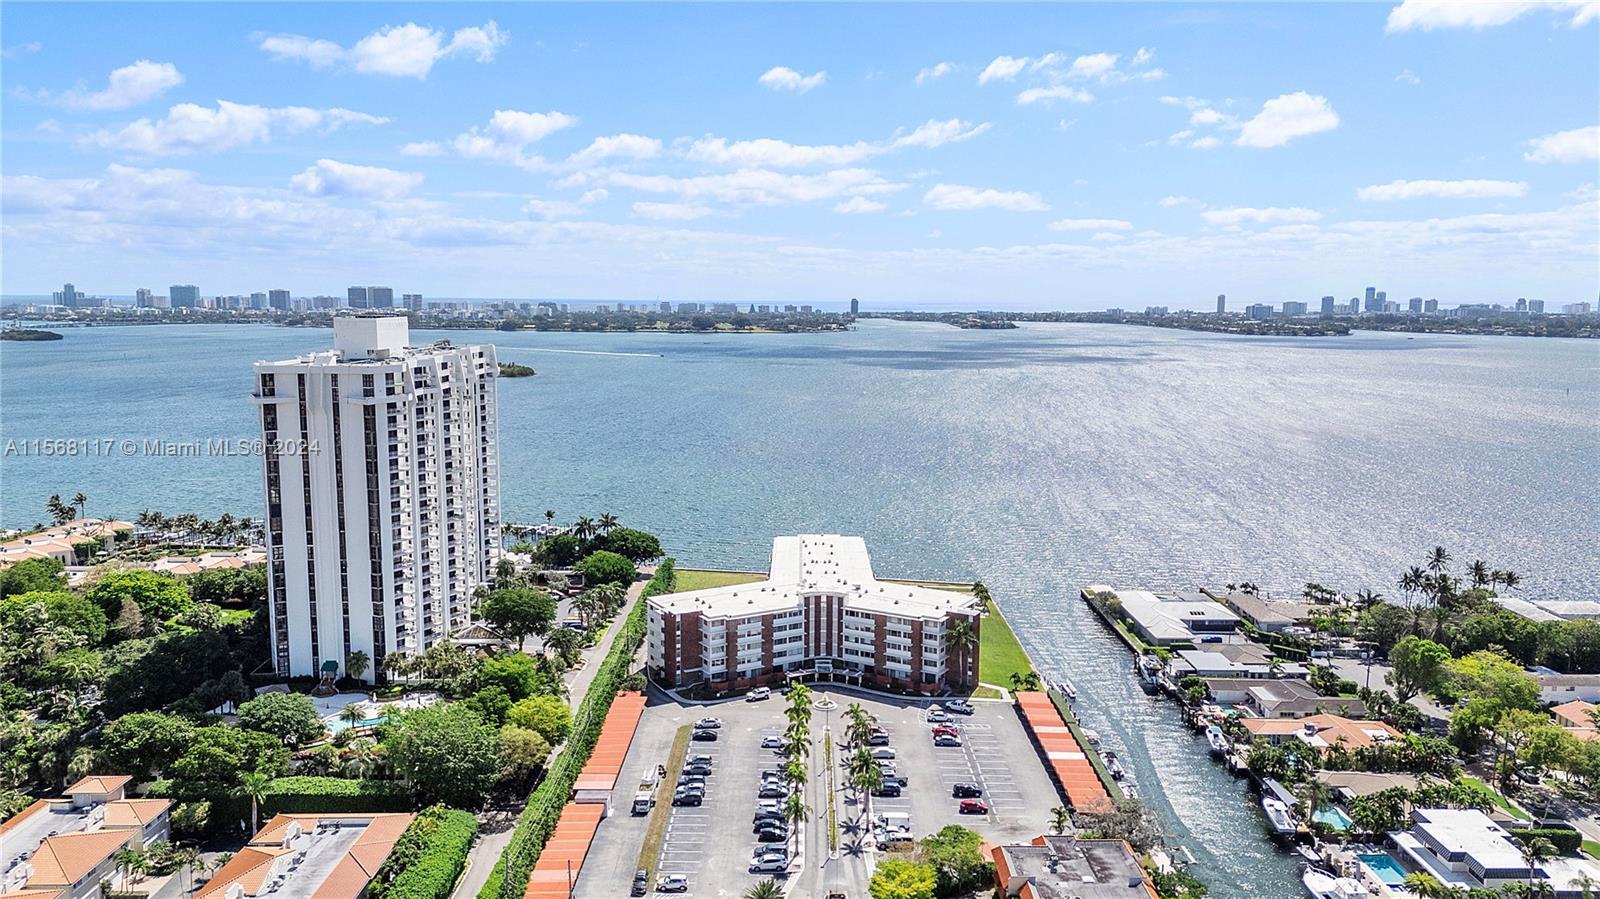 2 BEDROOMS AND 2 FULL BATHS ON THE 3RD FLOOR FACING NORTH WITH A VIEW OF THE WIDE BAY.  BALCONY HAS 